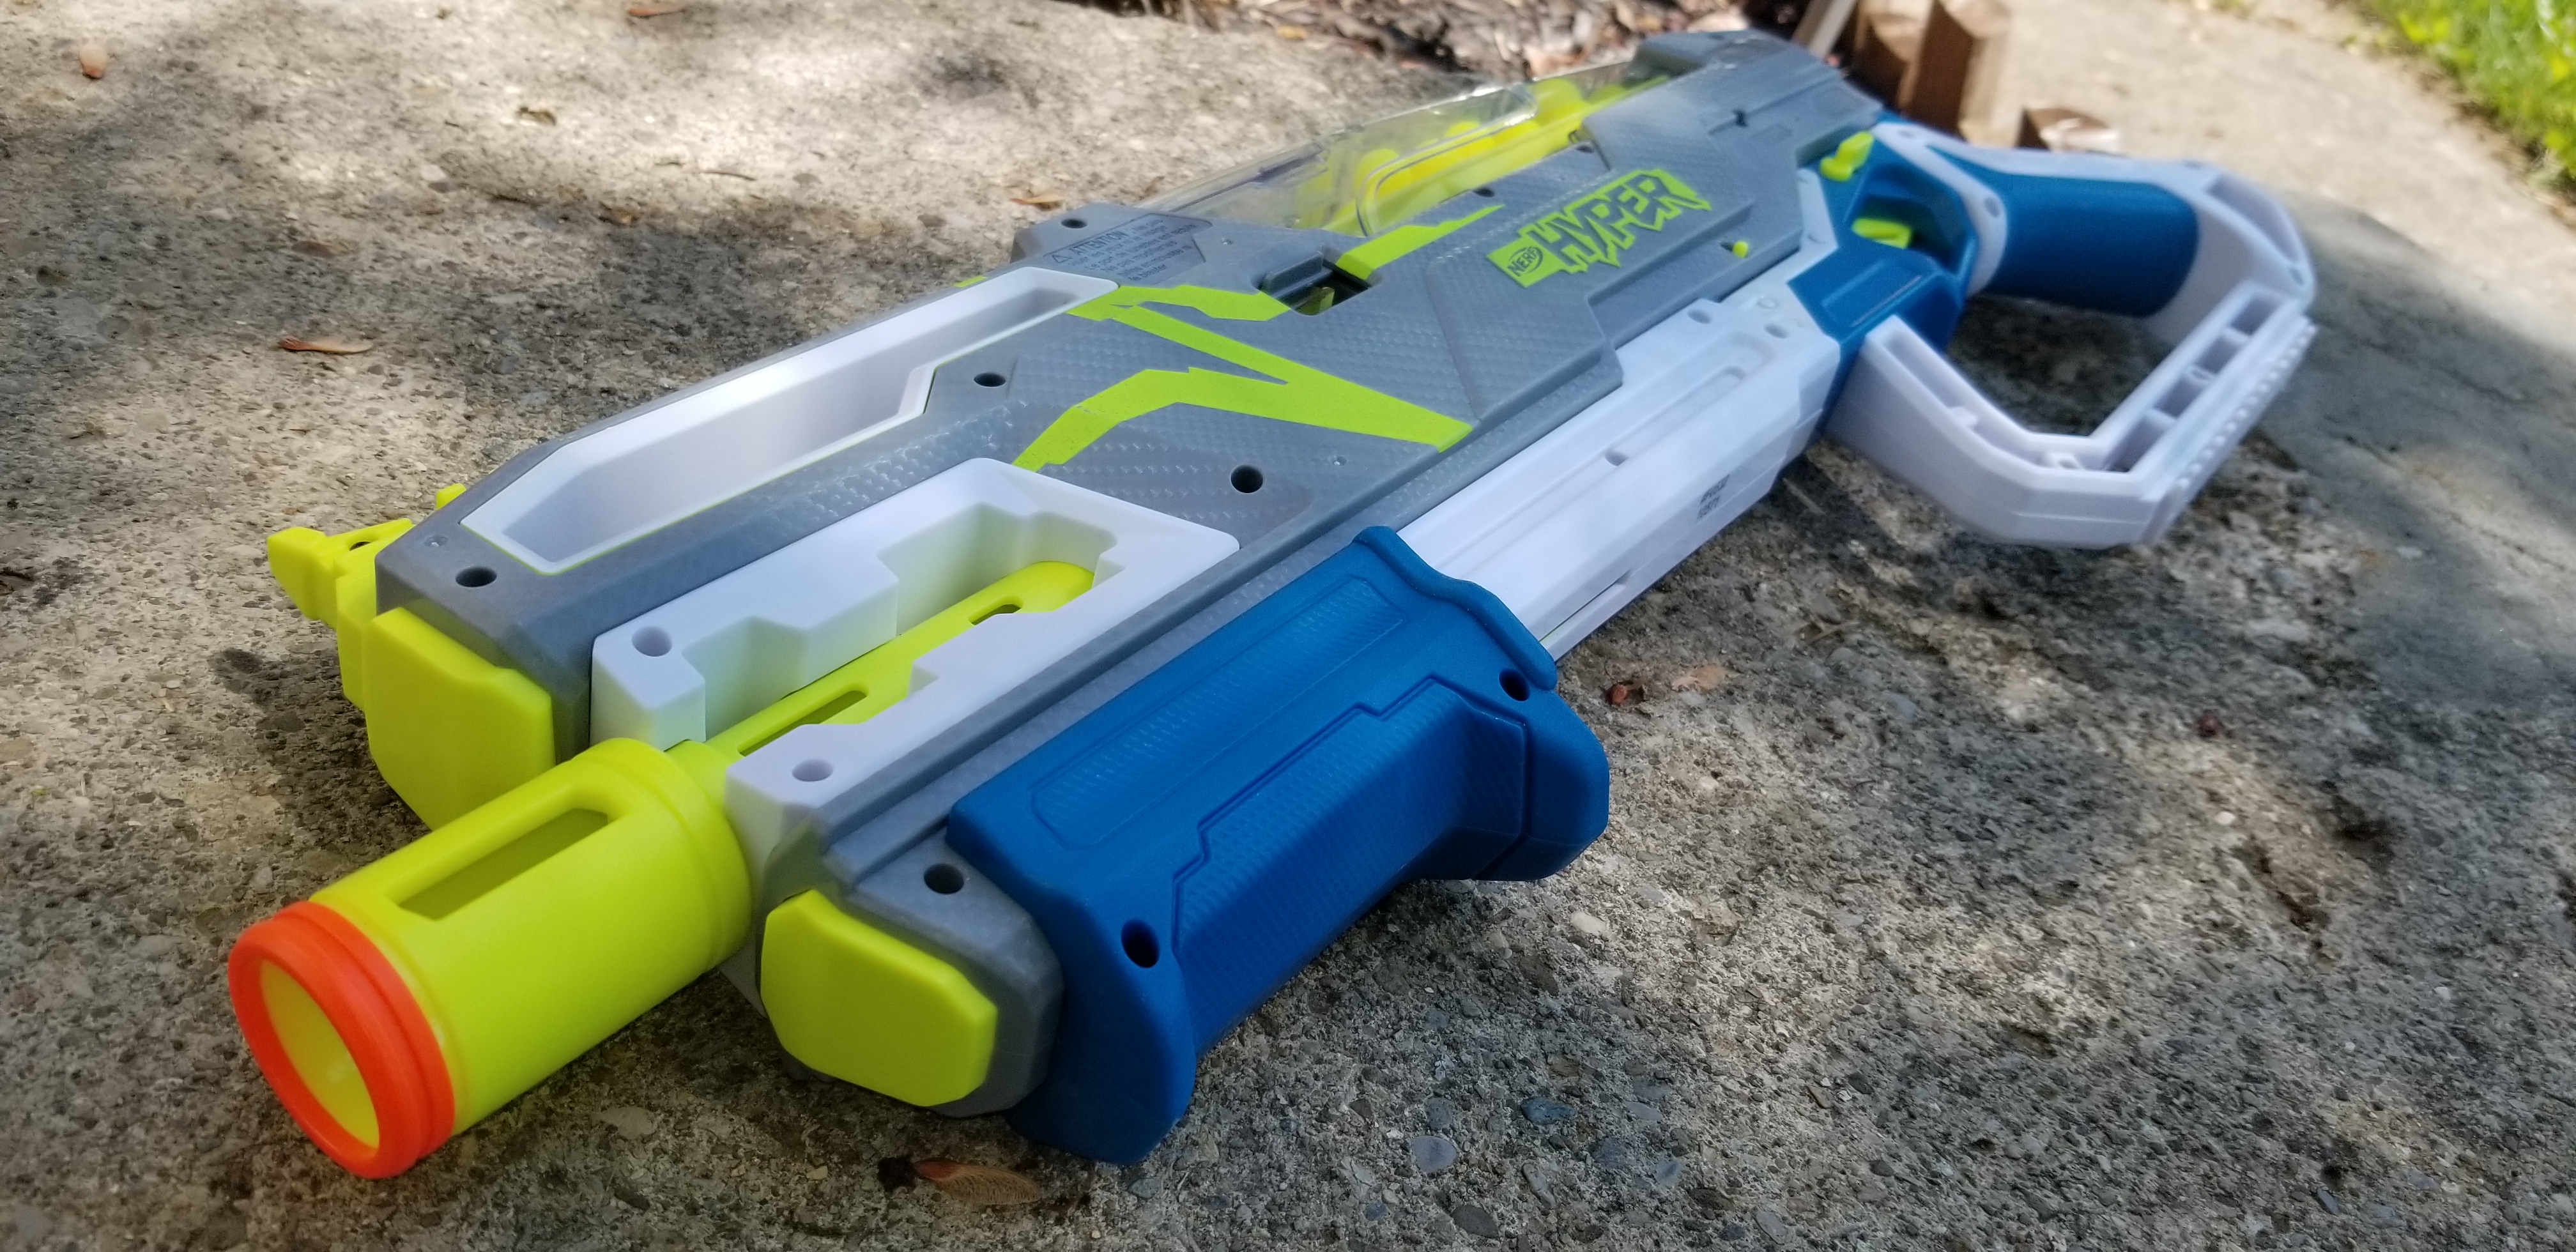 Nerf Modulus EXS-10 review - hands on with the most customisable